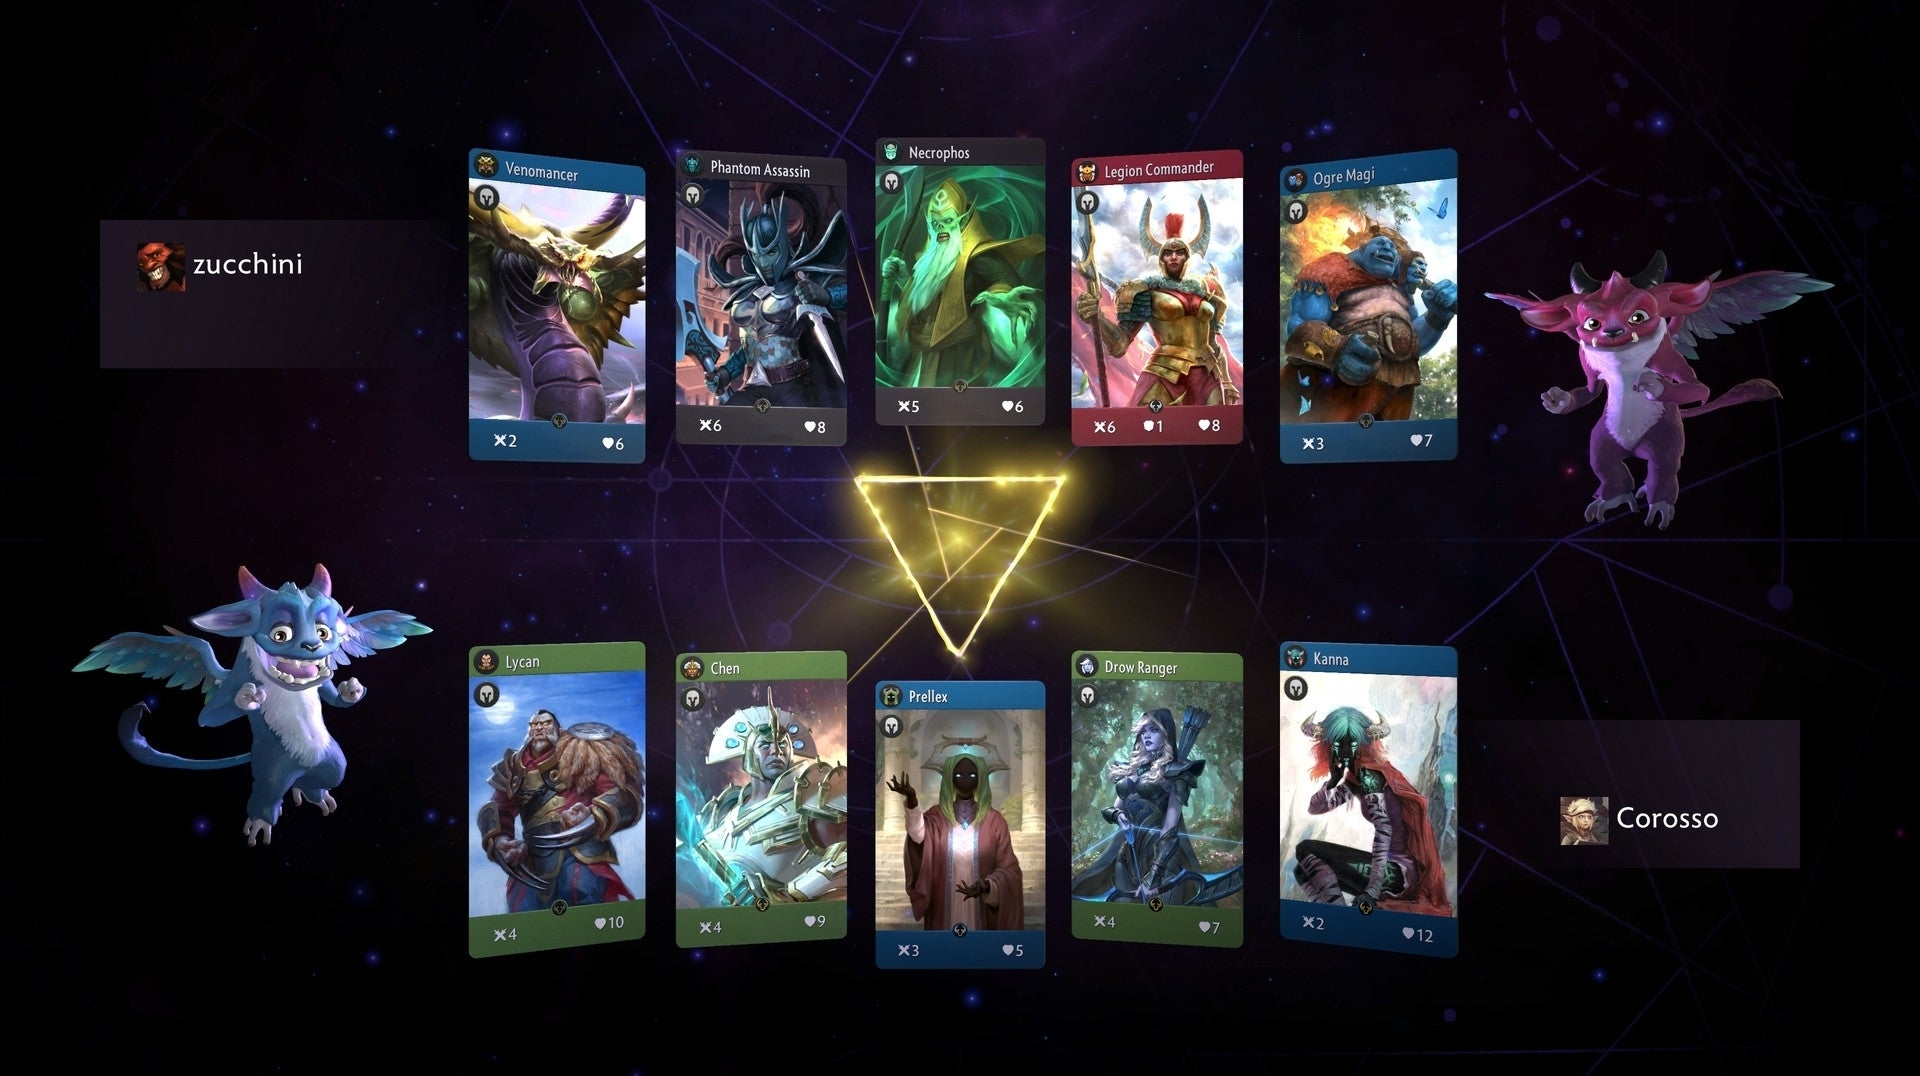 Image for Concern for Artifact as Magic: the Gathering creator leaves Valve amid layoffs